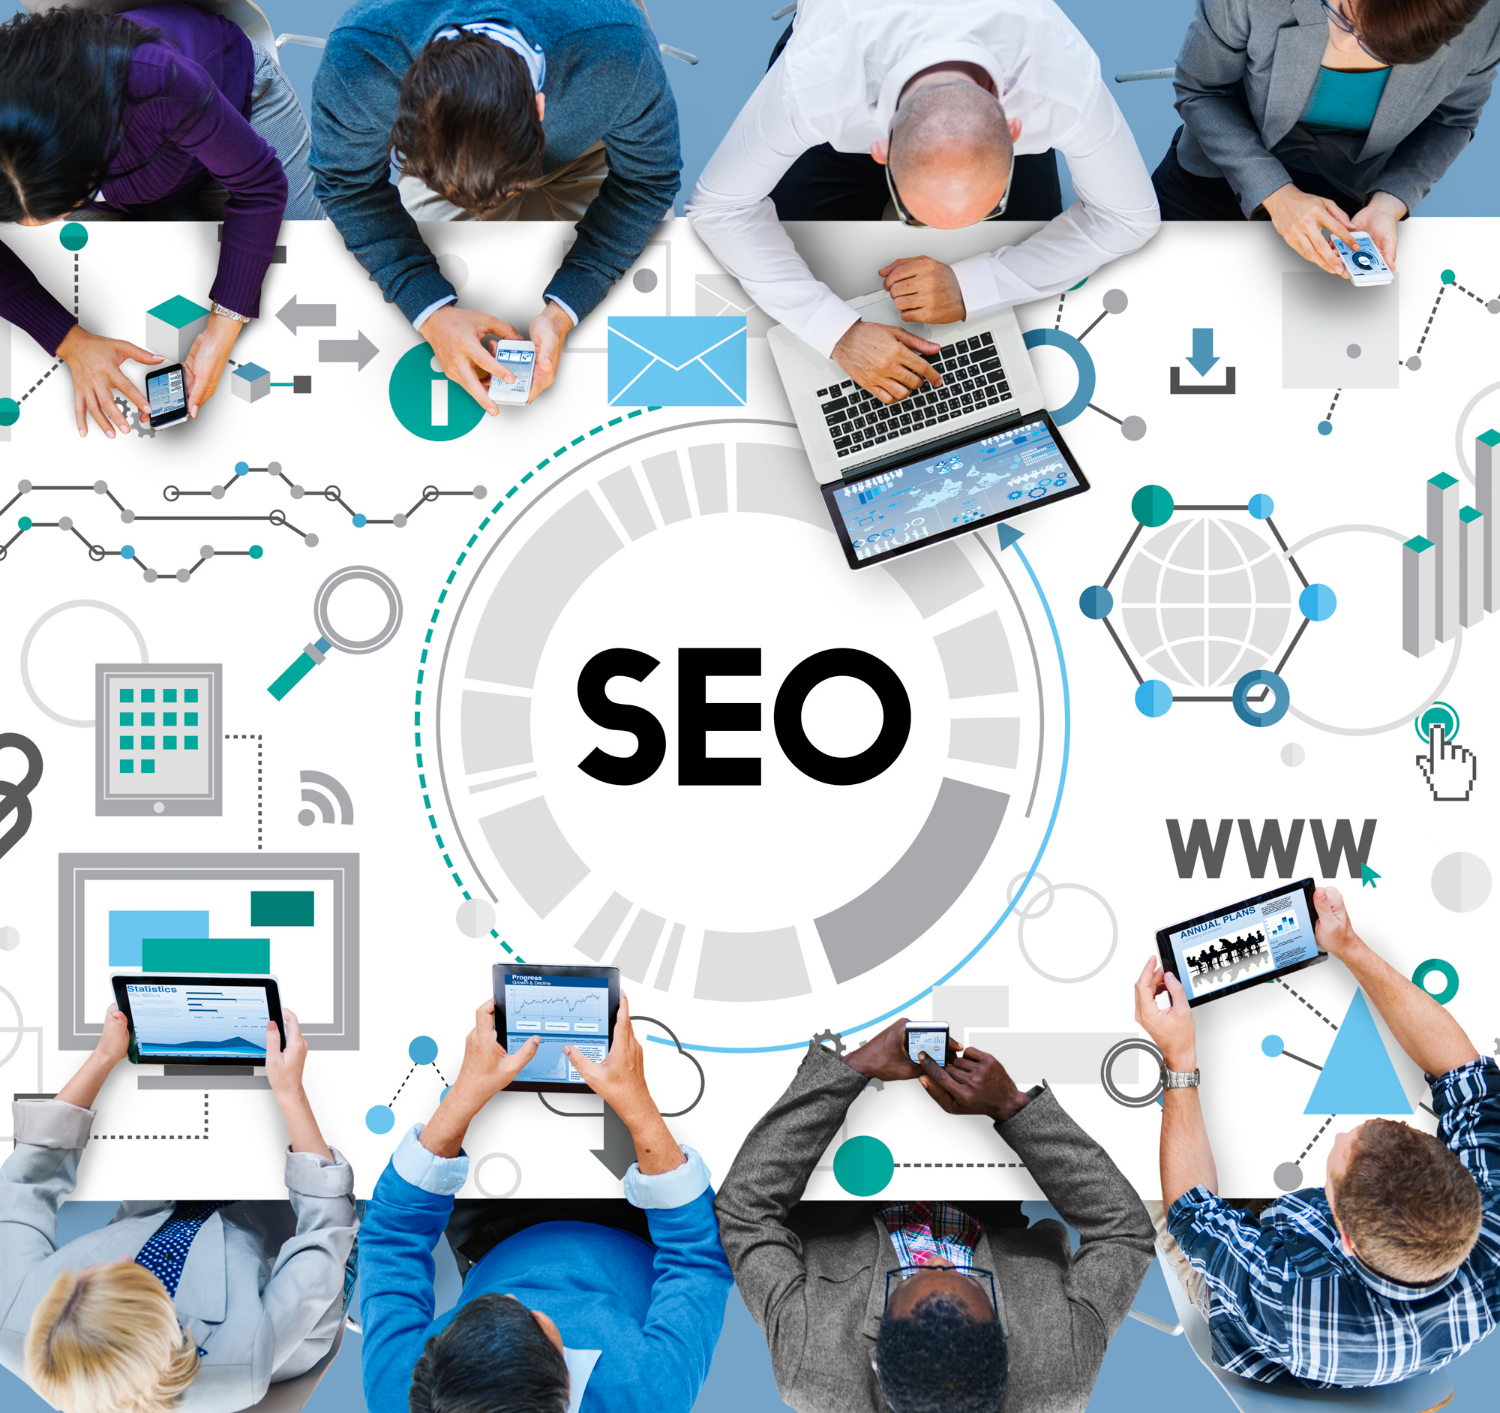 What Are the Advantages of an SEO Service Provider?